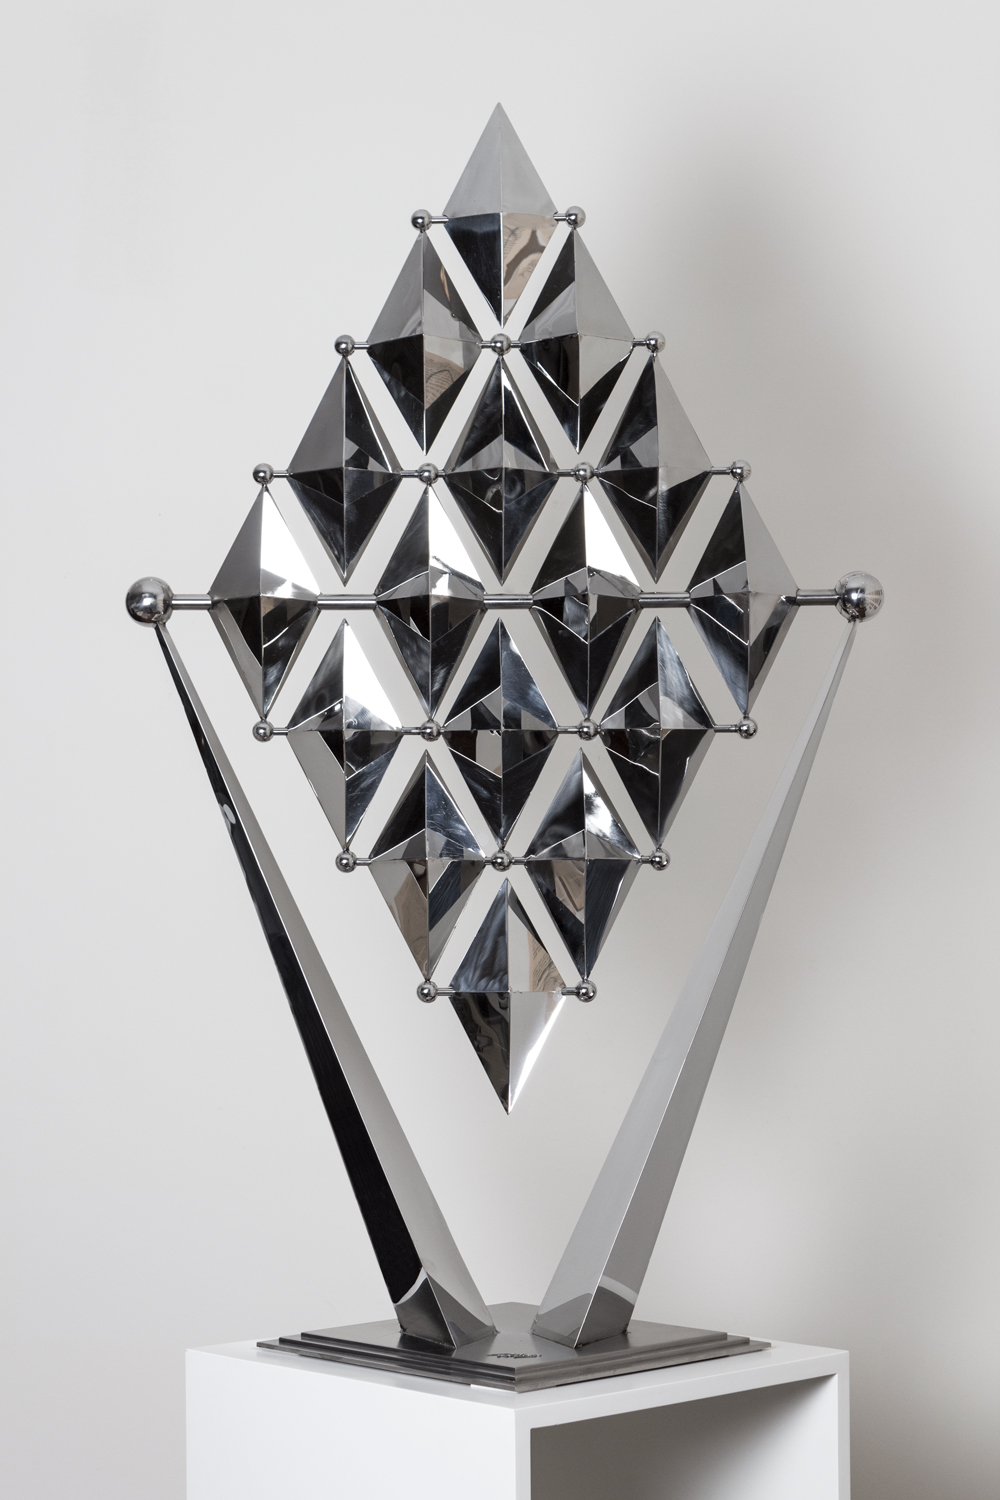 Ralfonso masters kinetic sculpture with unparalleled imagination and an exceptional ability to set art into motion. These unique talents shine through in KARO, a German word for rhombus, a geometric diamond shape. Closer inspection of this 120 cm tall artwork, limited to just 10 pieces, reveals 16 self-balancing diamond-shaped elements forming an even larger rhombus. The striking, clean lines come to life with the slightest breeze or touch of the hand, moving each rhombus back and forth in an unlimited combination of patterns.